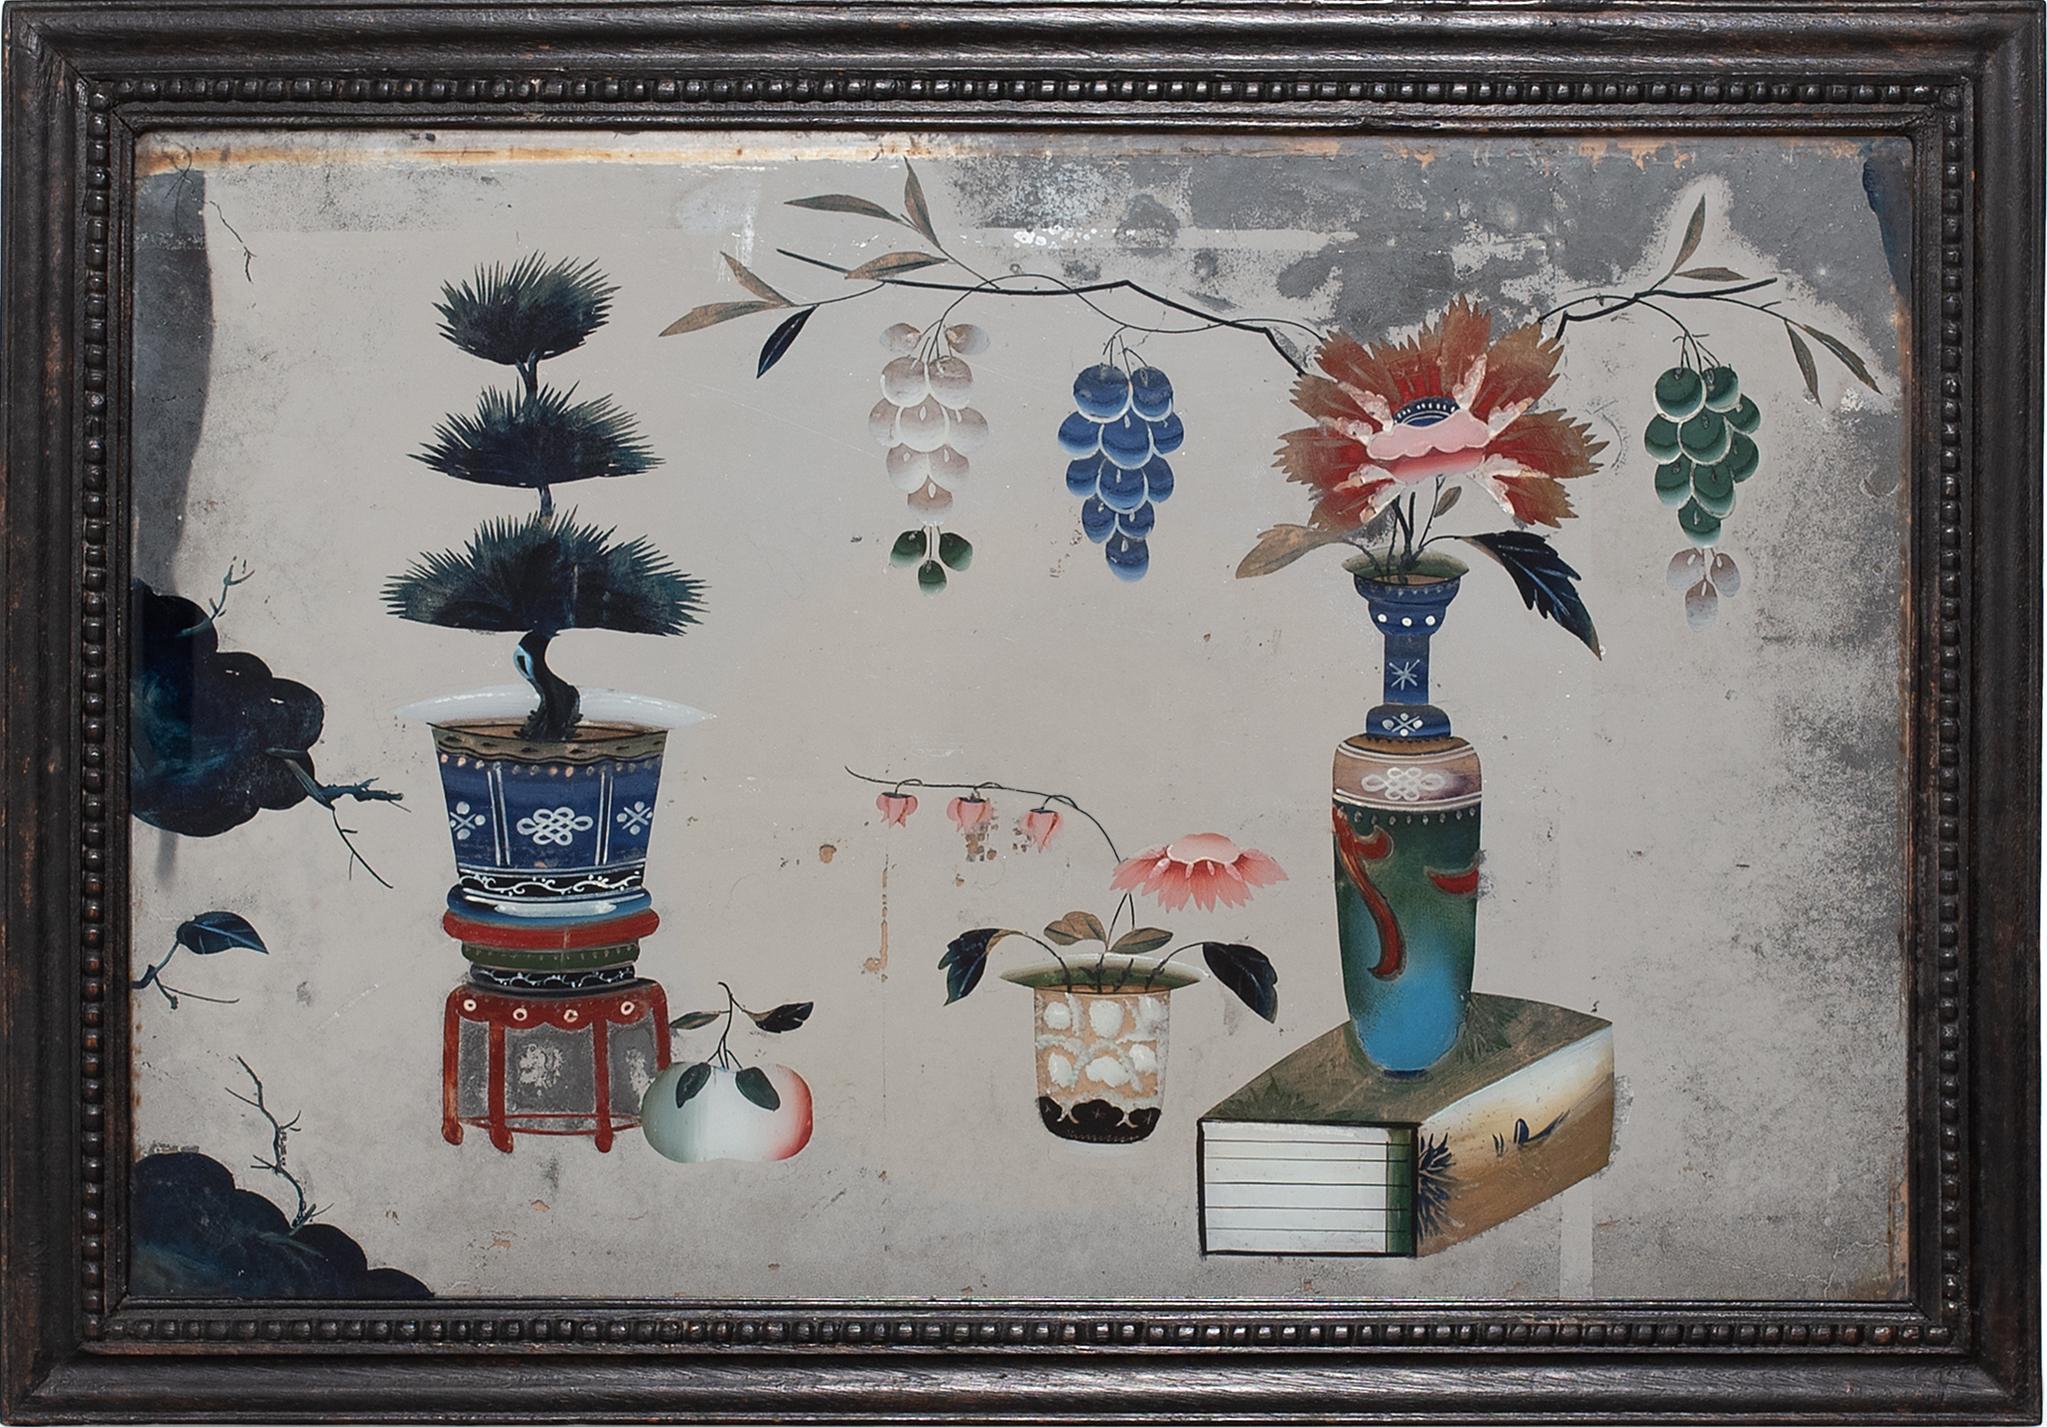 Unknown Still-Life Painting - Chinese Reverse Glass Painting of Scholars' Objects, c. 1850